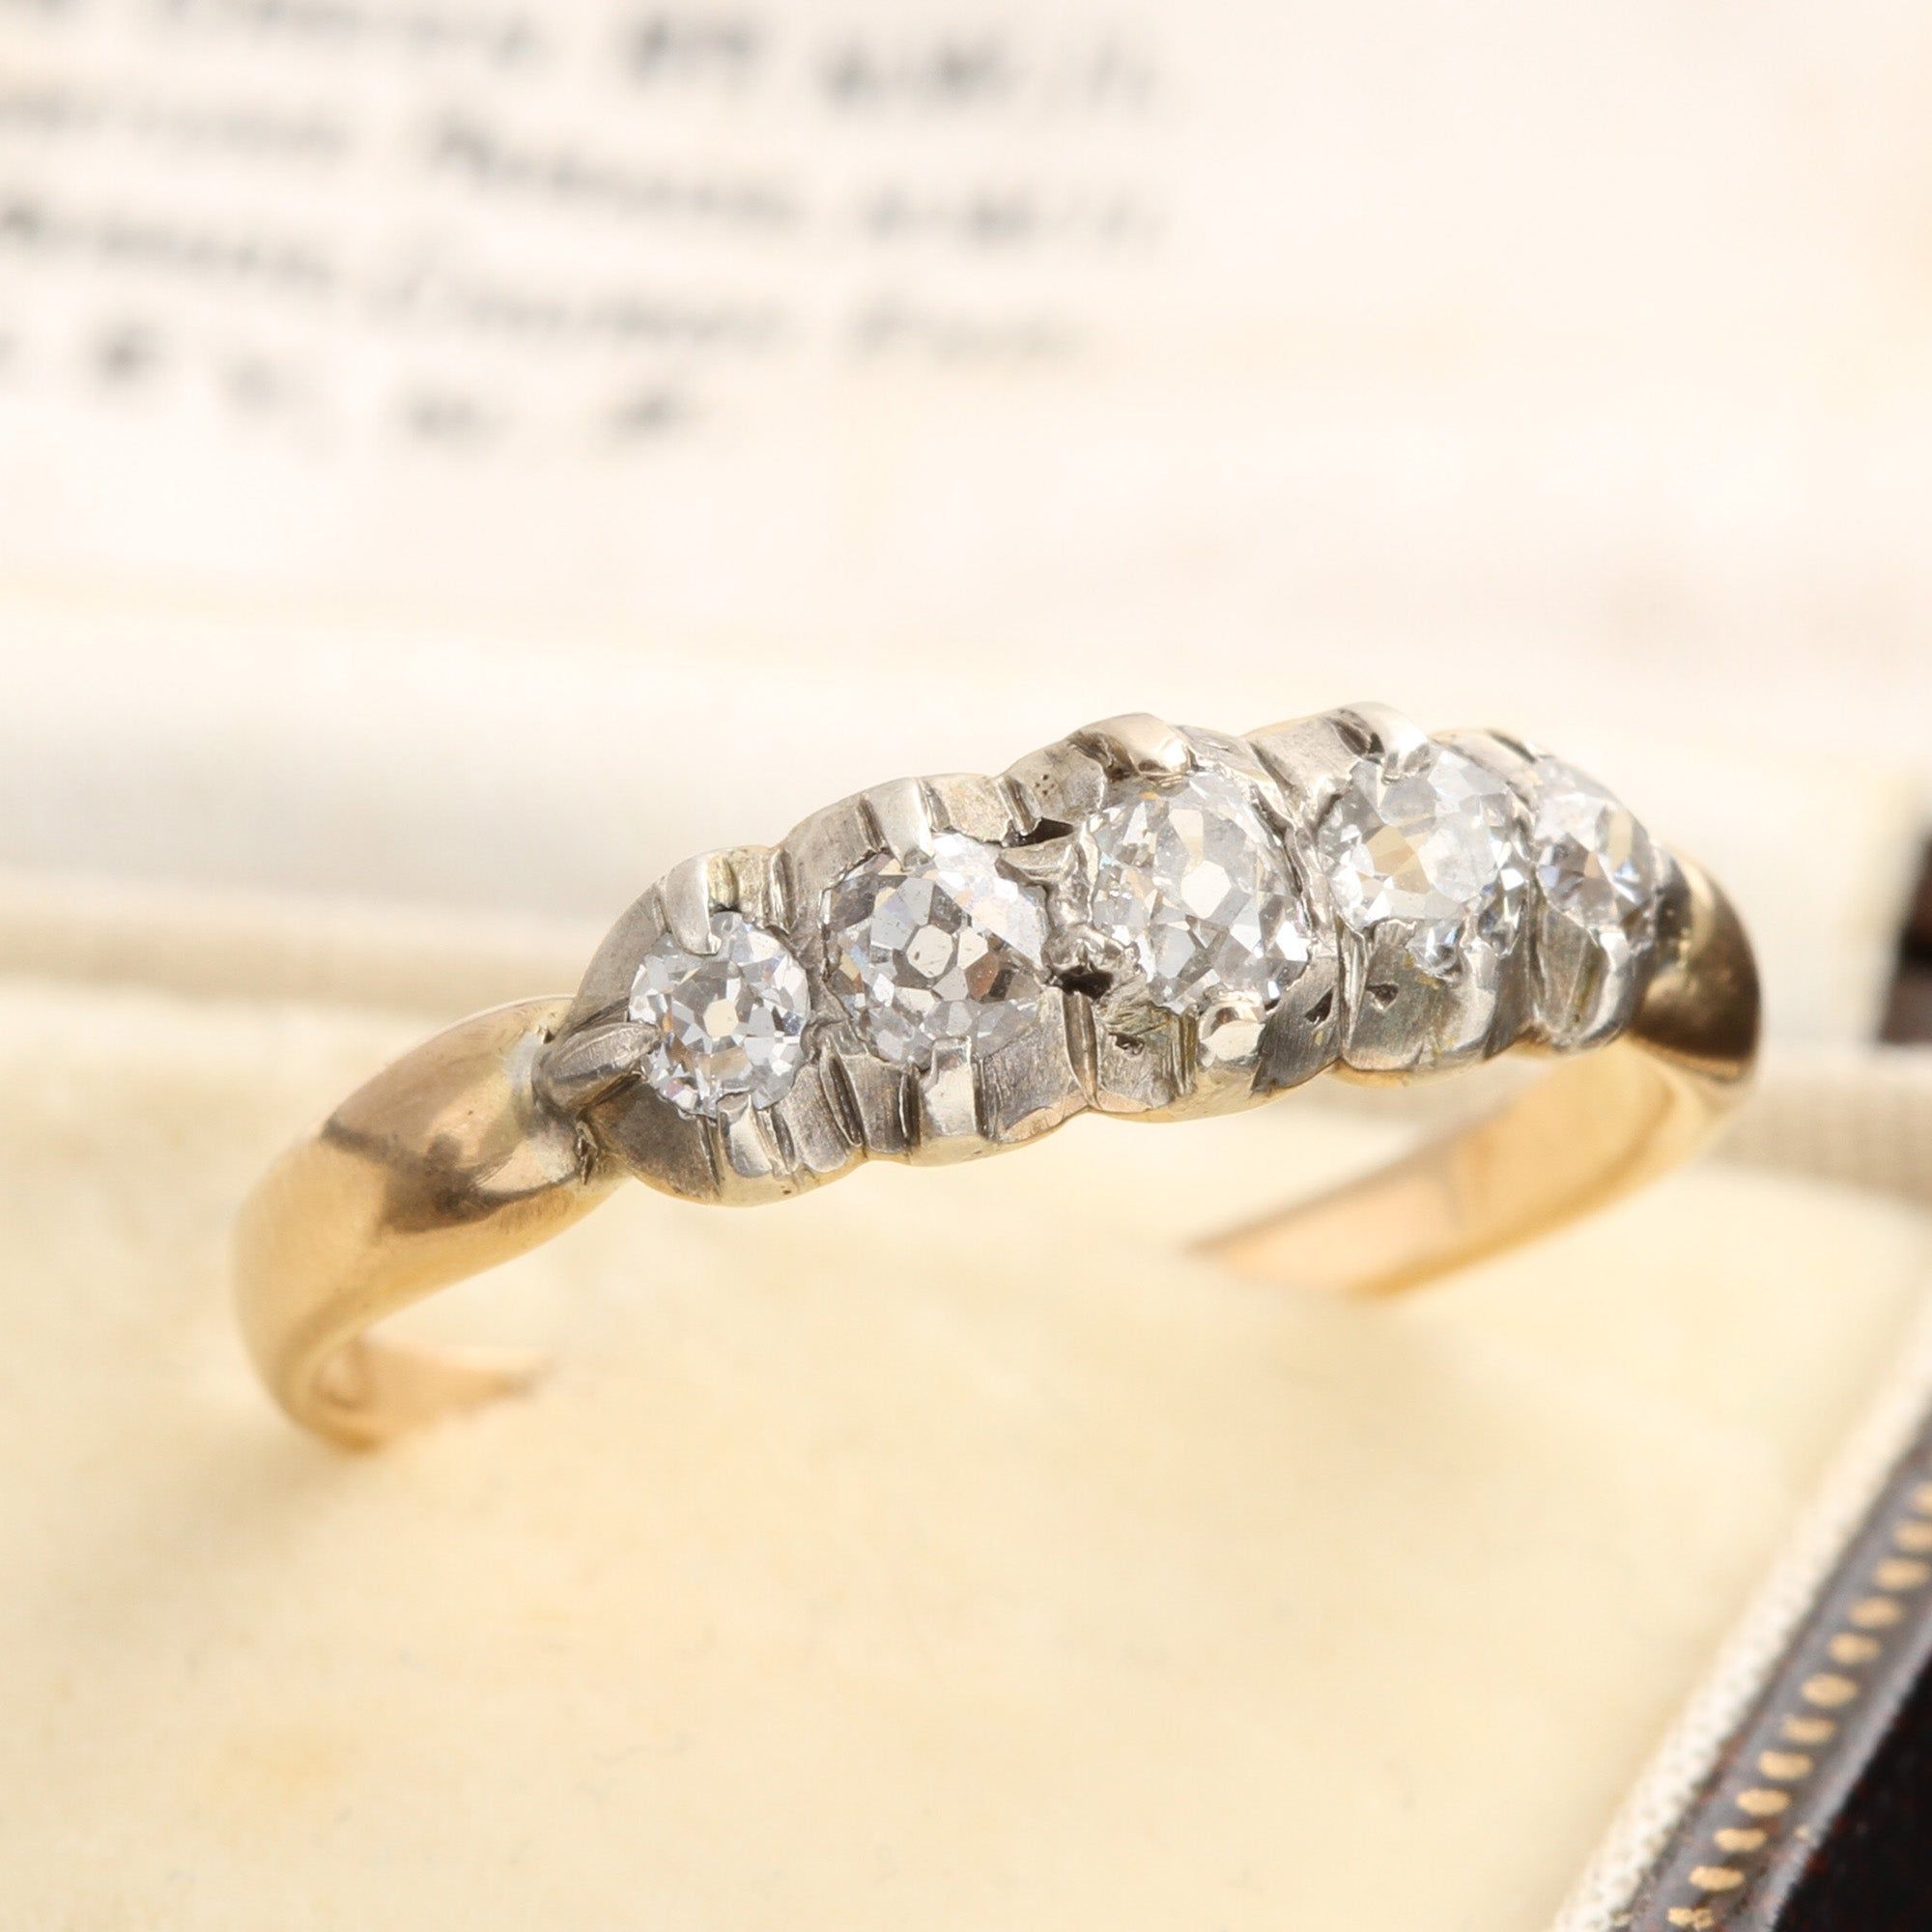 Detail of Early Victorian Five Diamond Ring